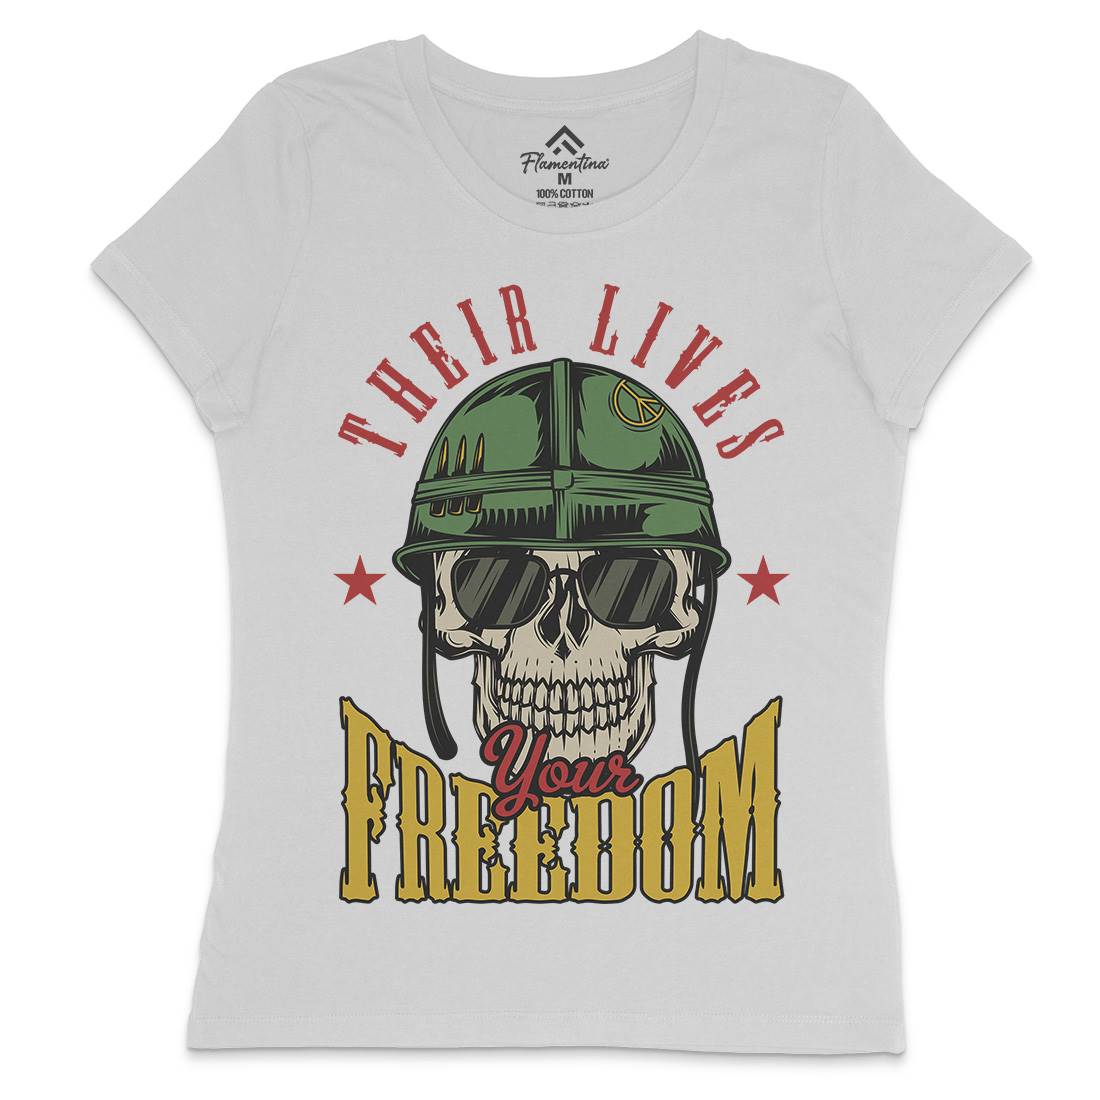 Your Freedom Womens Crew Neck T-Shirt Army C899